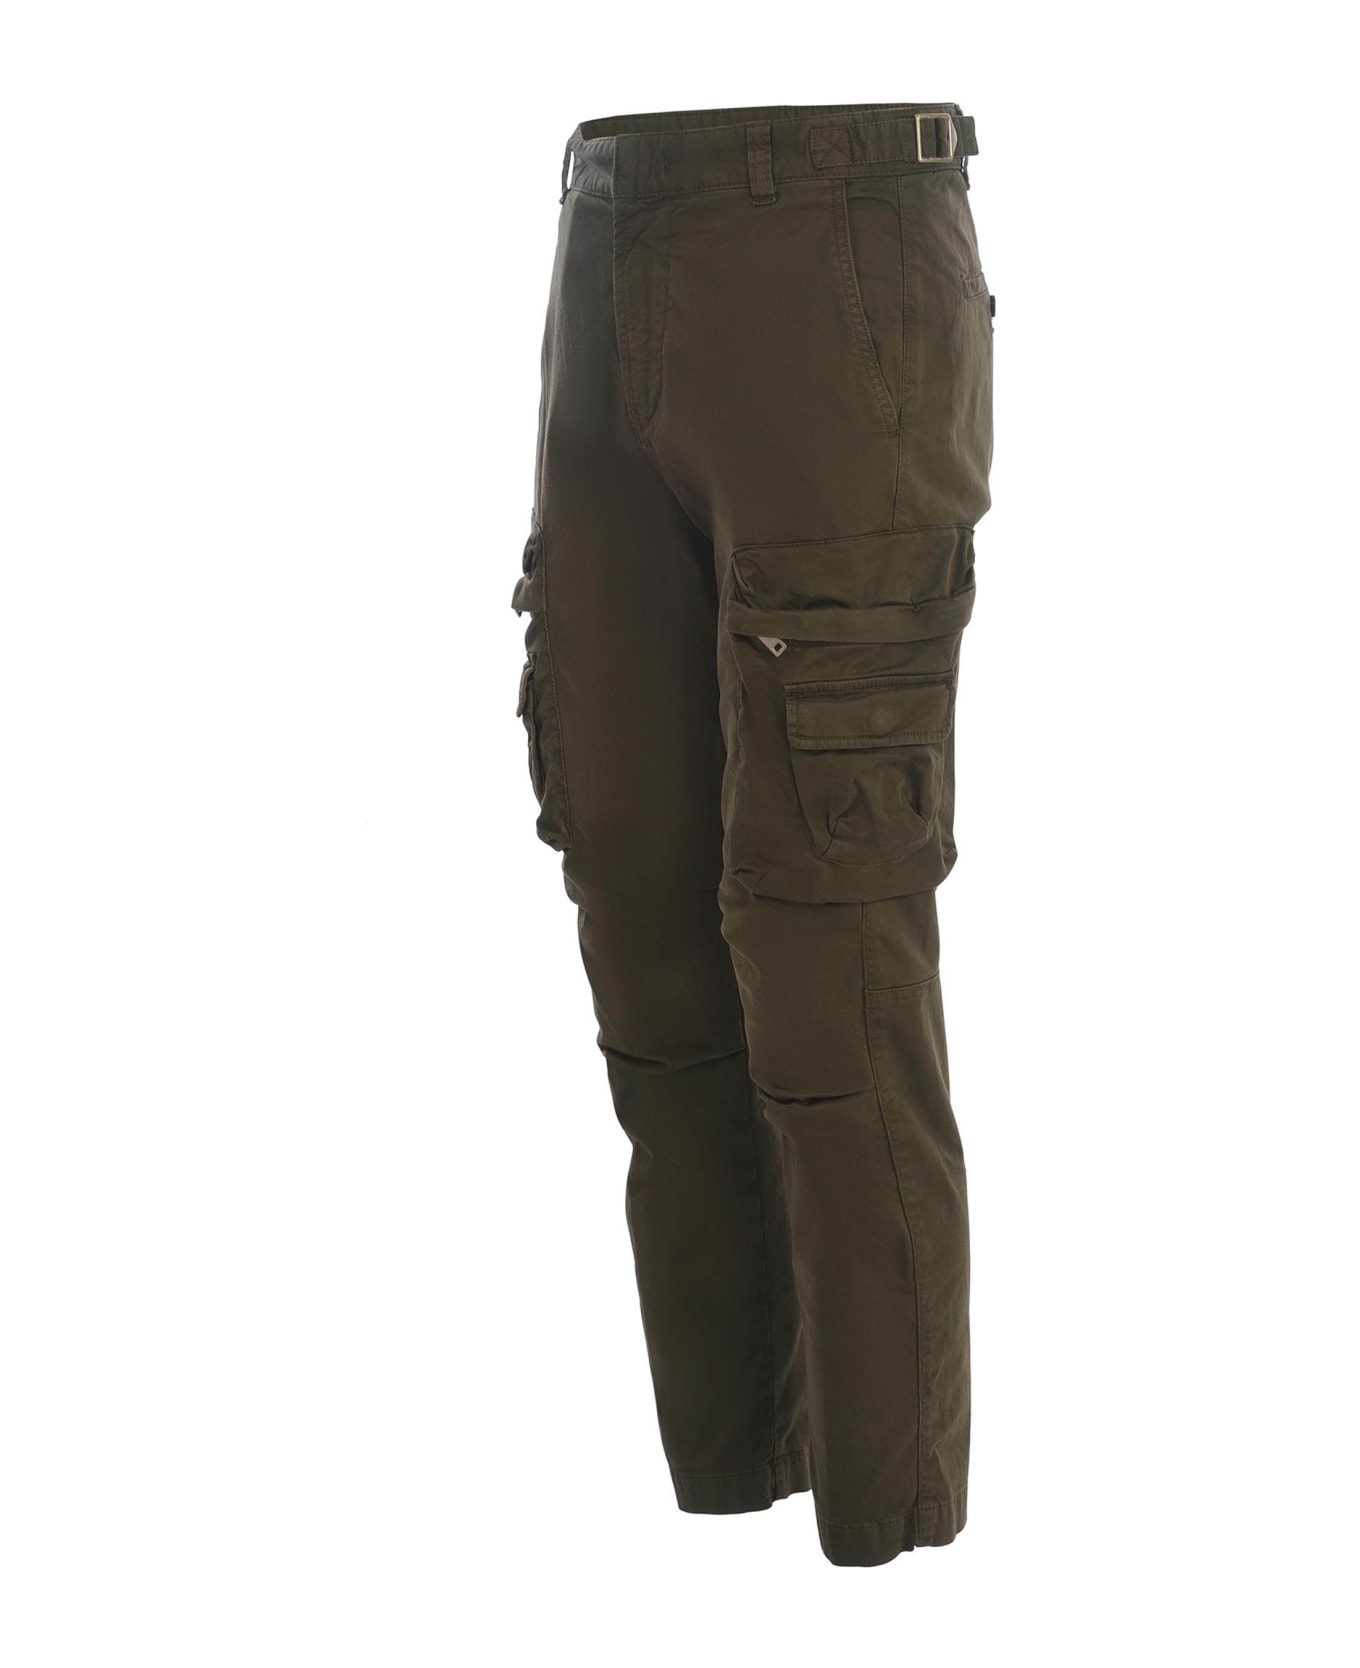 Diesel P-argym-new-a Faded Cargo Pants - Af Green ボトムス